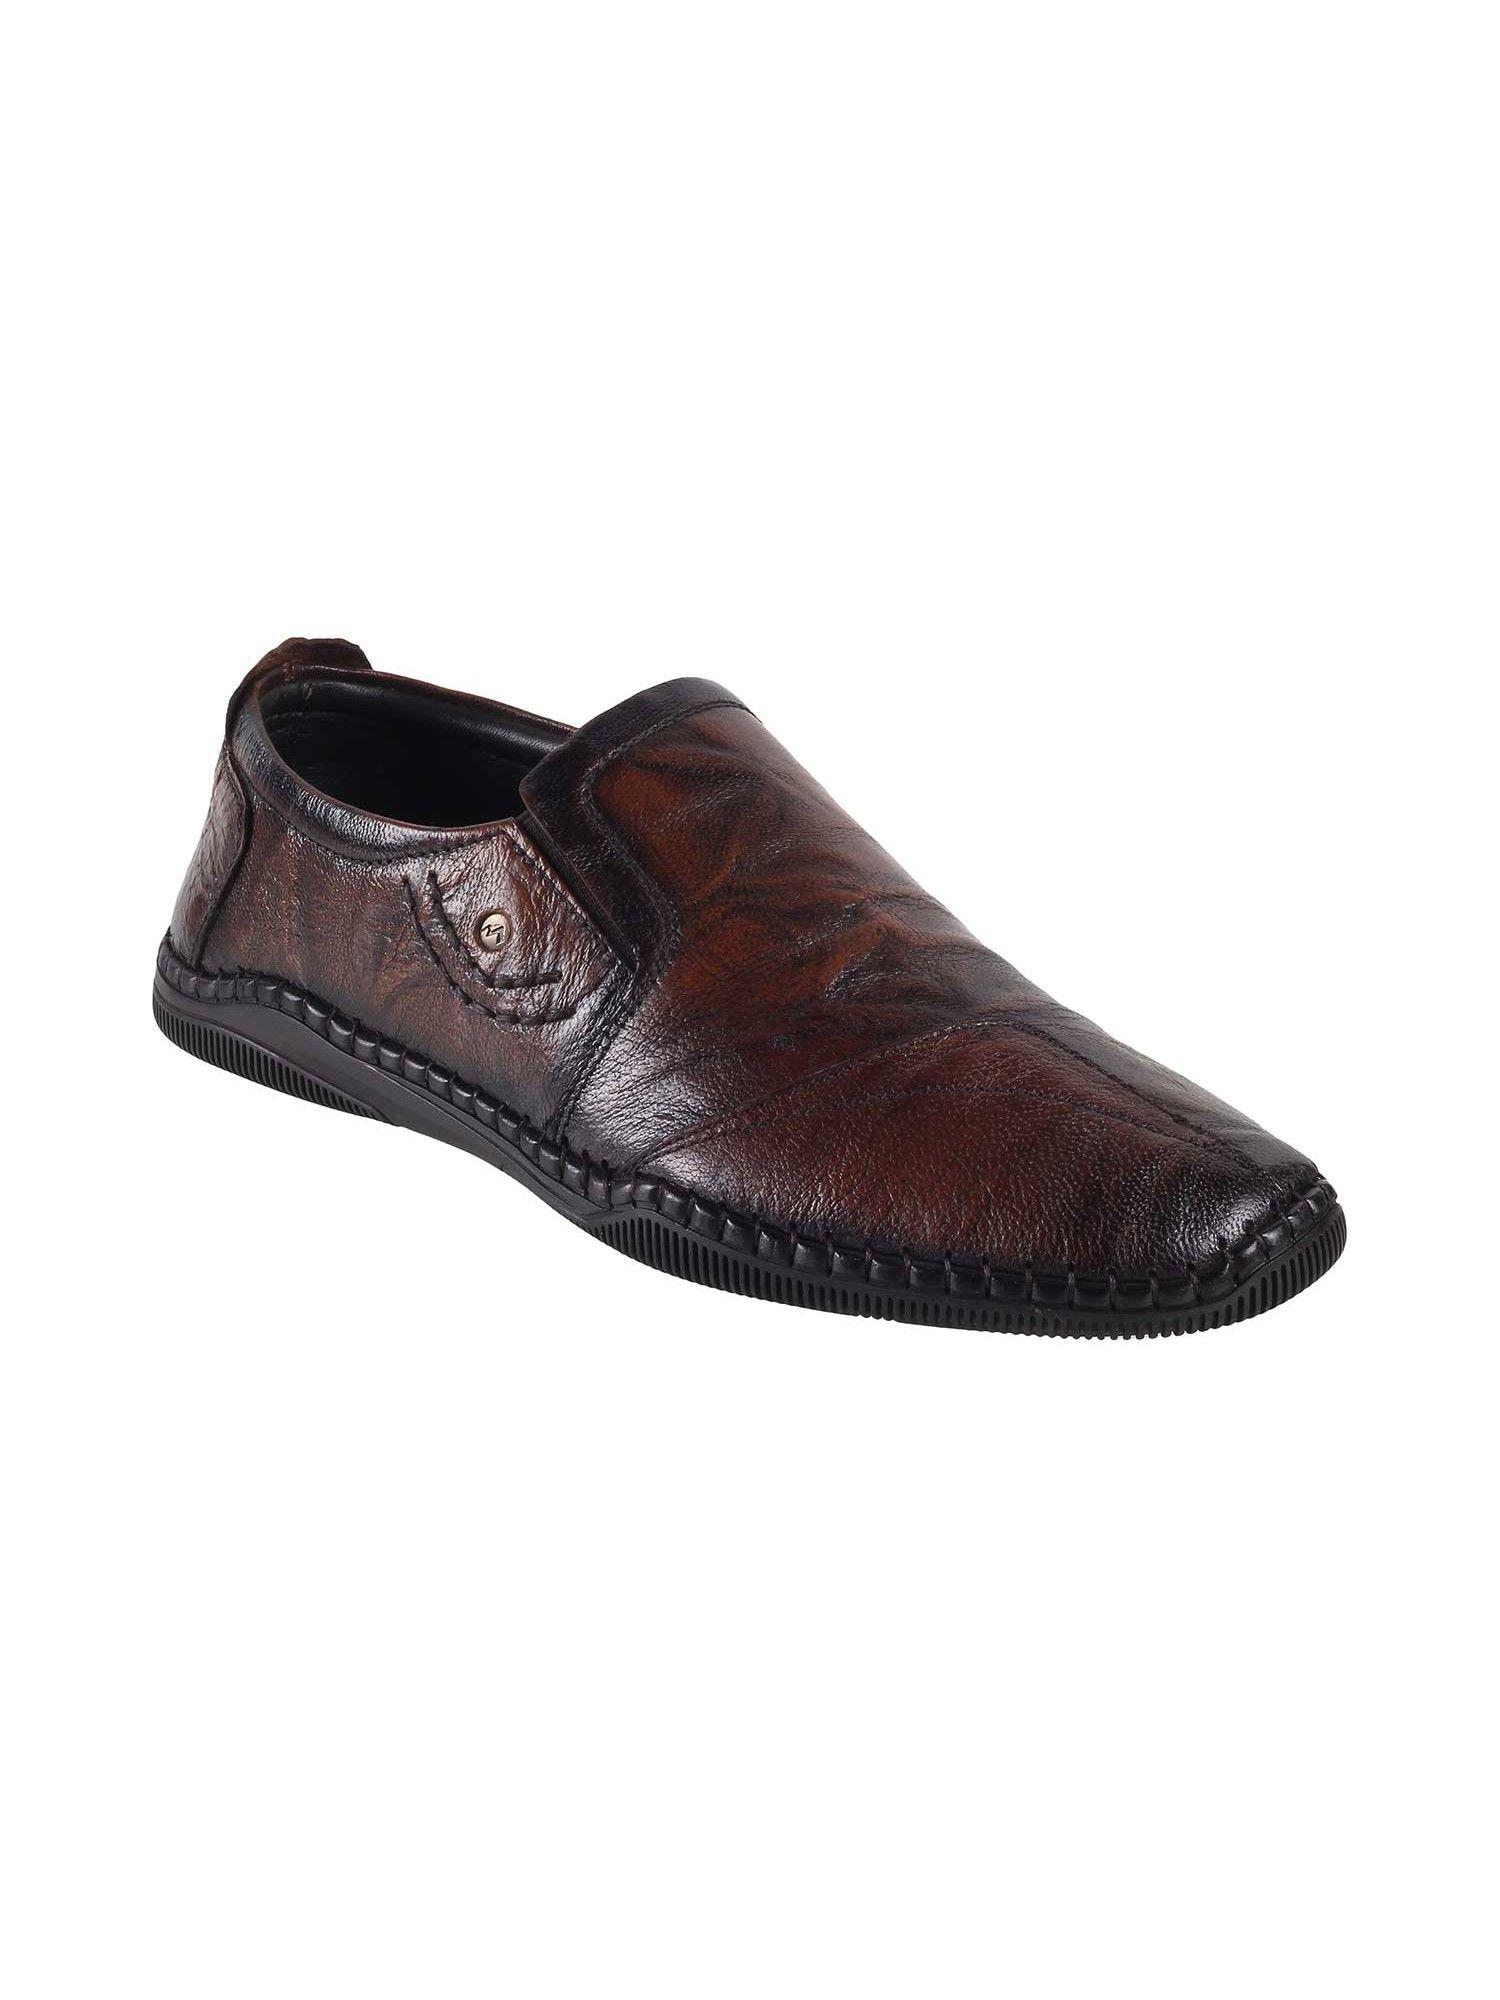 mens brown leather textured casual shoes